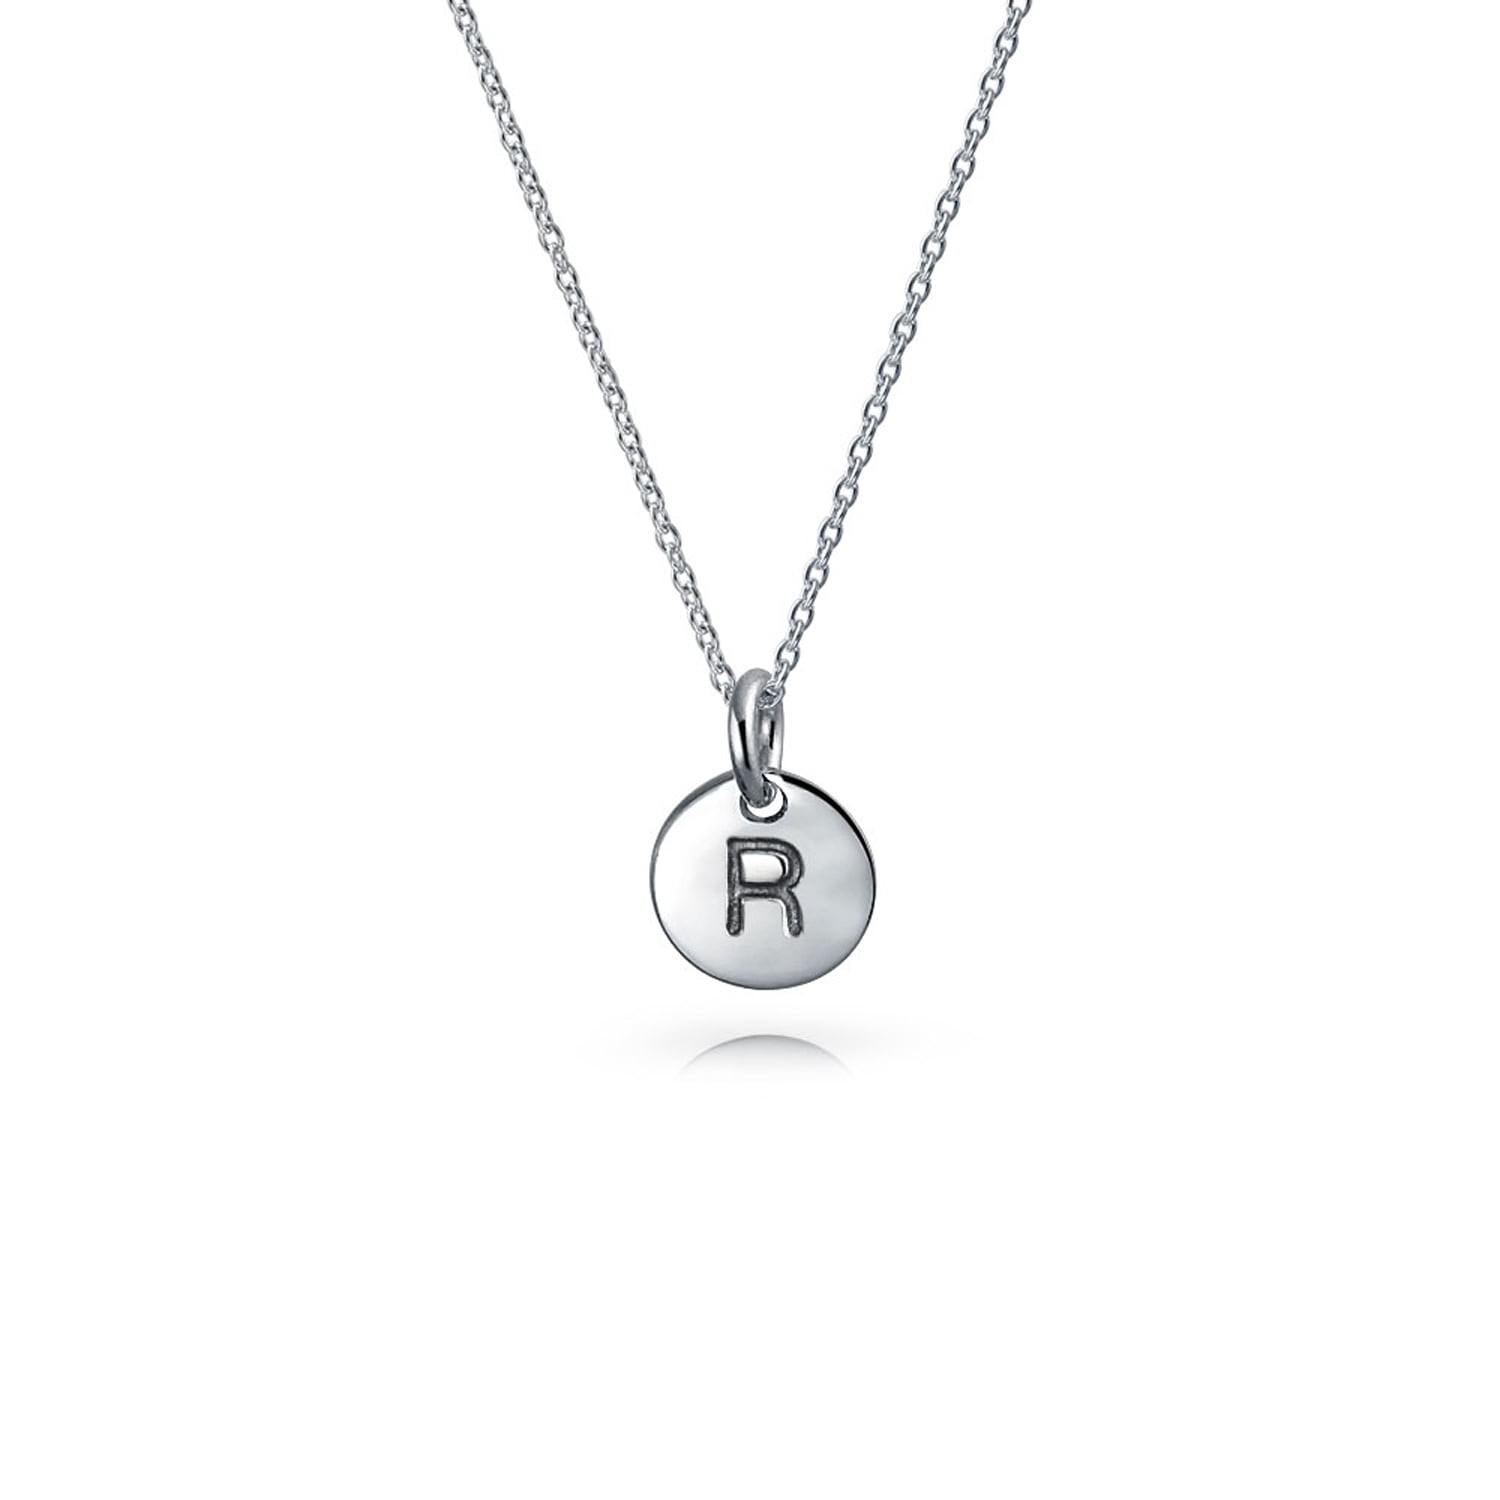 Details about   The Letter "W" 925 Sterling Silver Necklace w